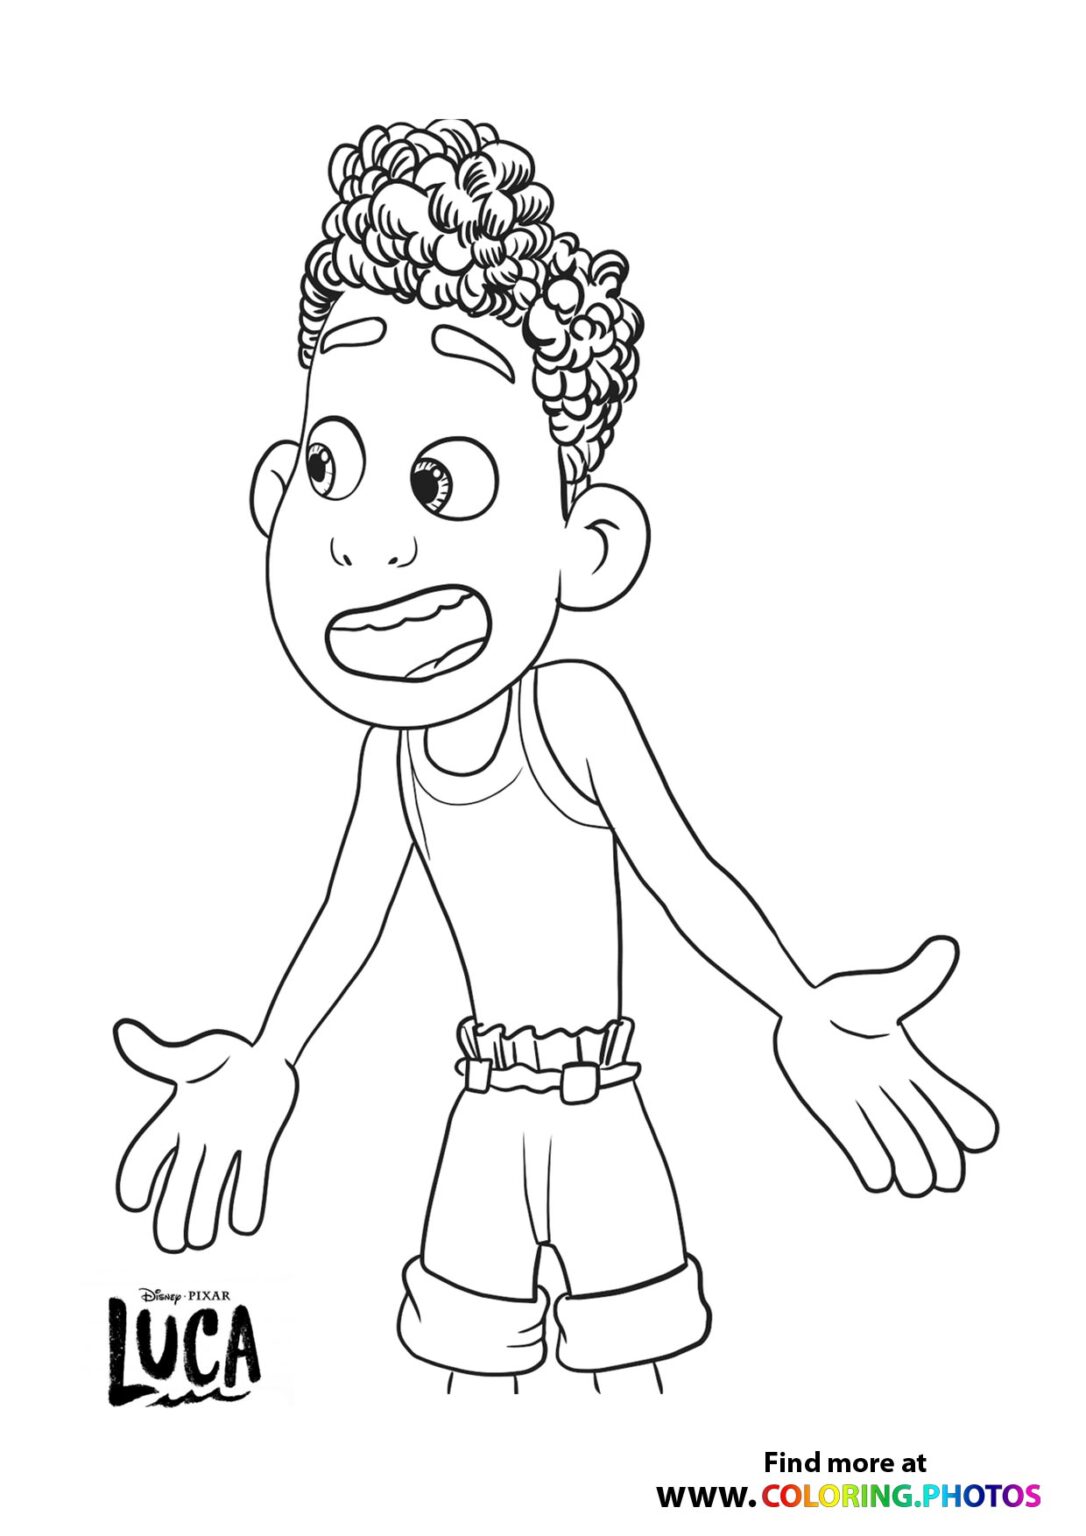 Luca Alberto - Coloring Pages for kids